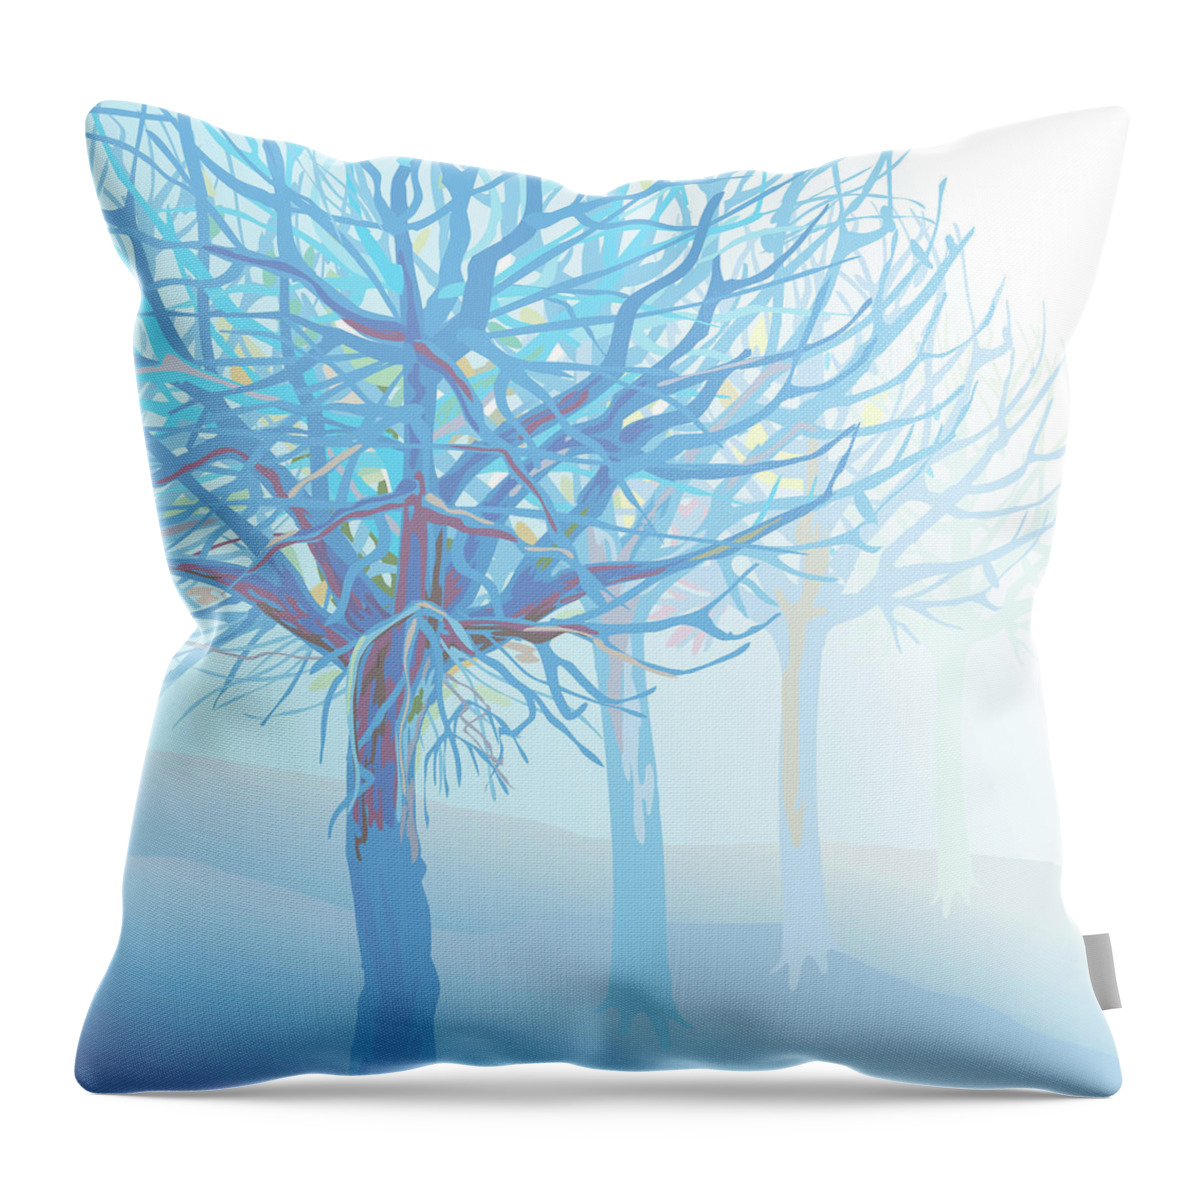 Scenics Throw Pillow featuring the digital art Pastel Blue Trees And Branches In Foggy by Charles Harker